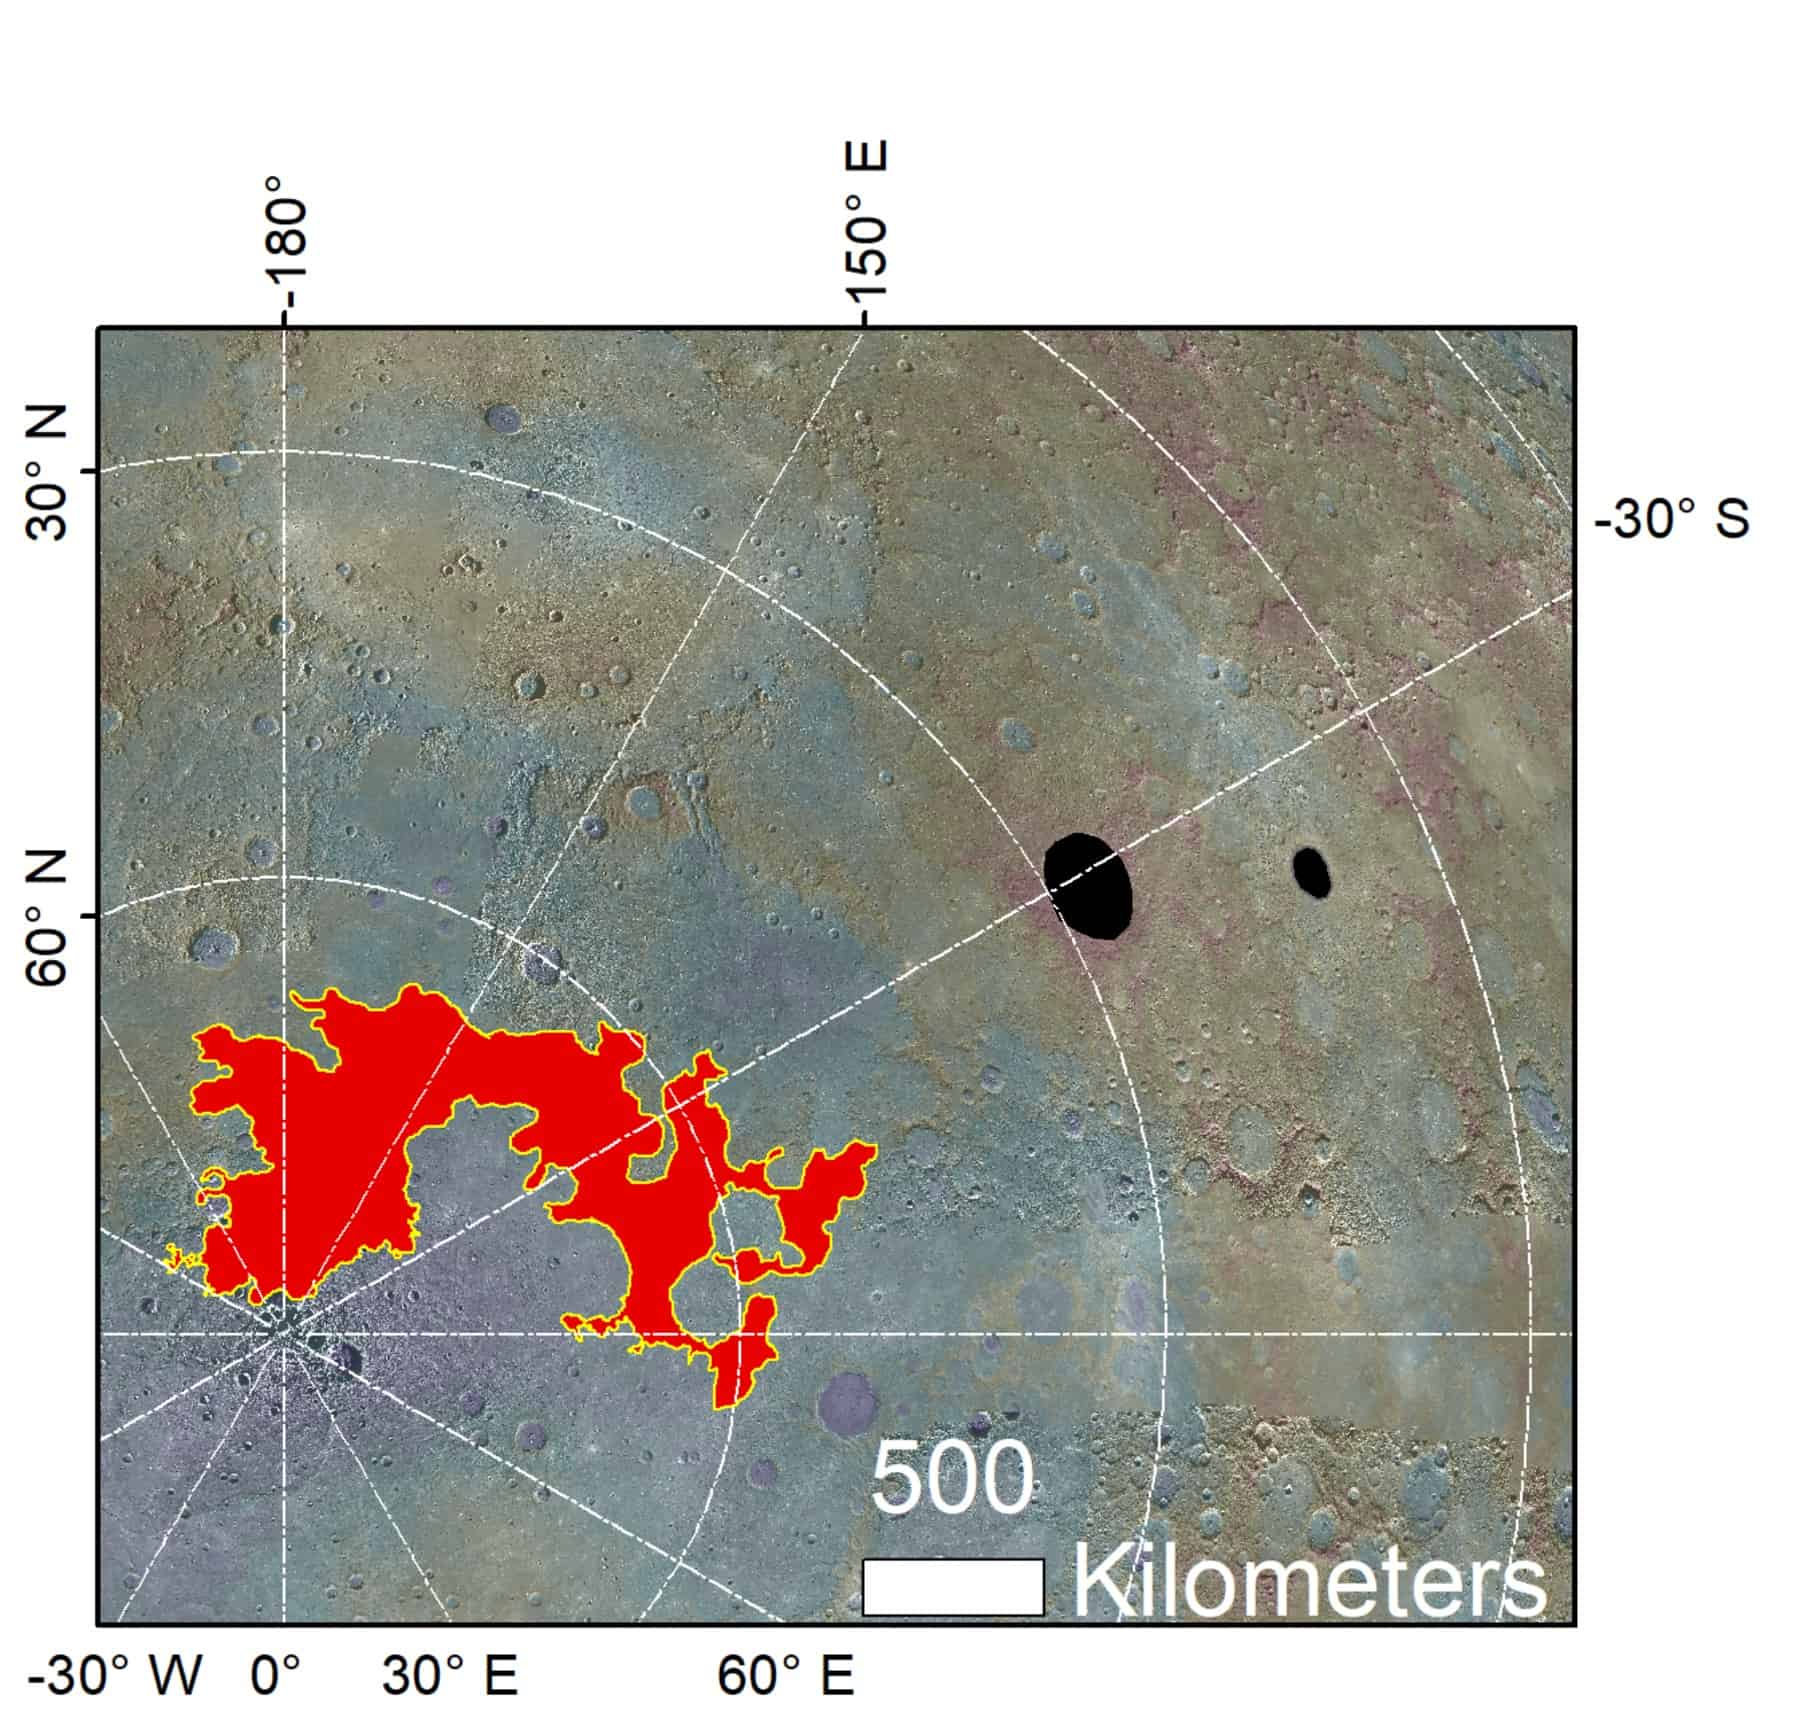 a map showing the cratered surface of a planet and a large red area denoting where glaciers of salt can be found near Mercury's north pole